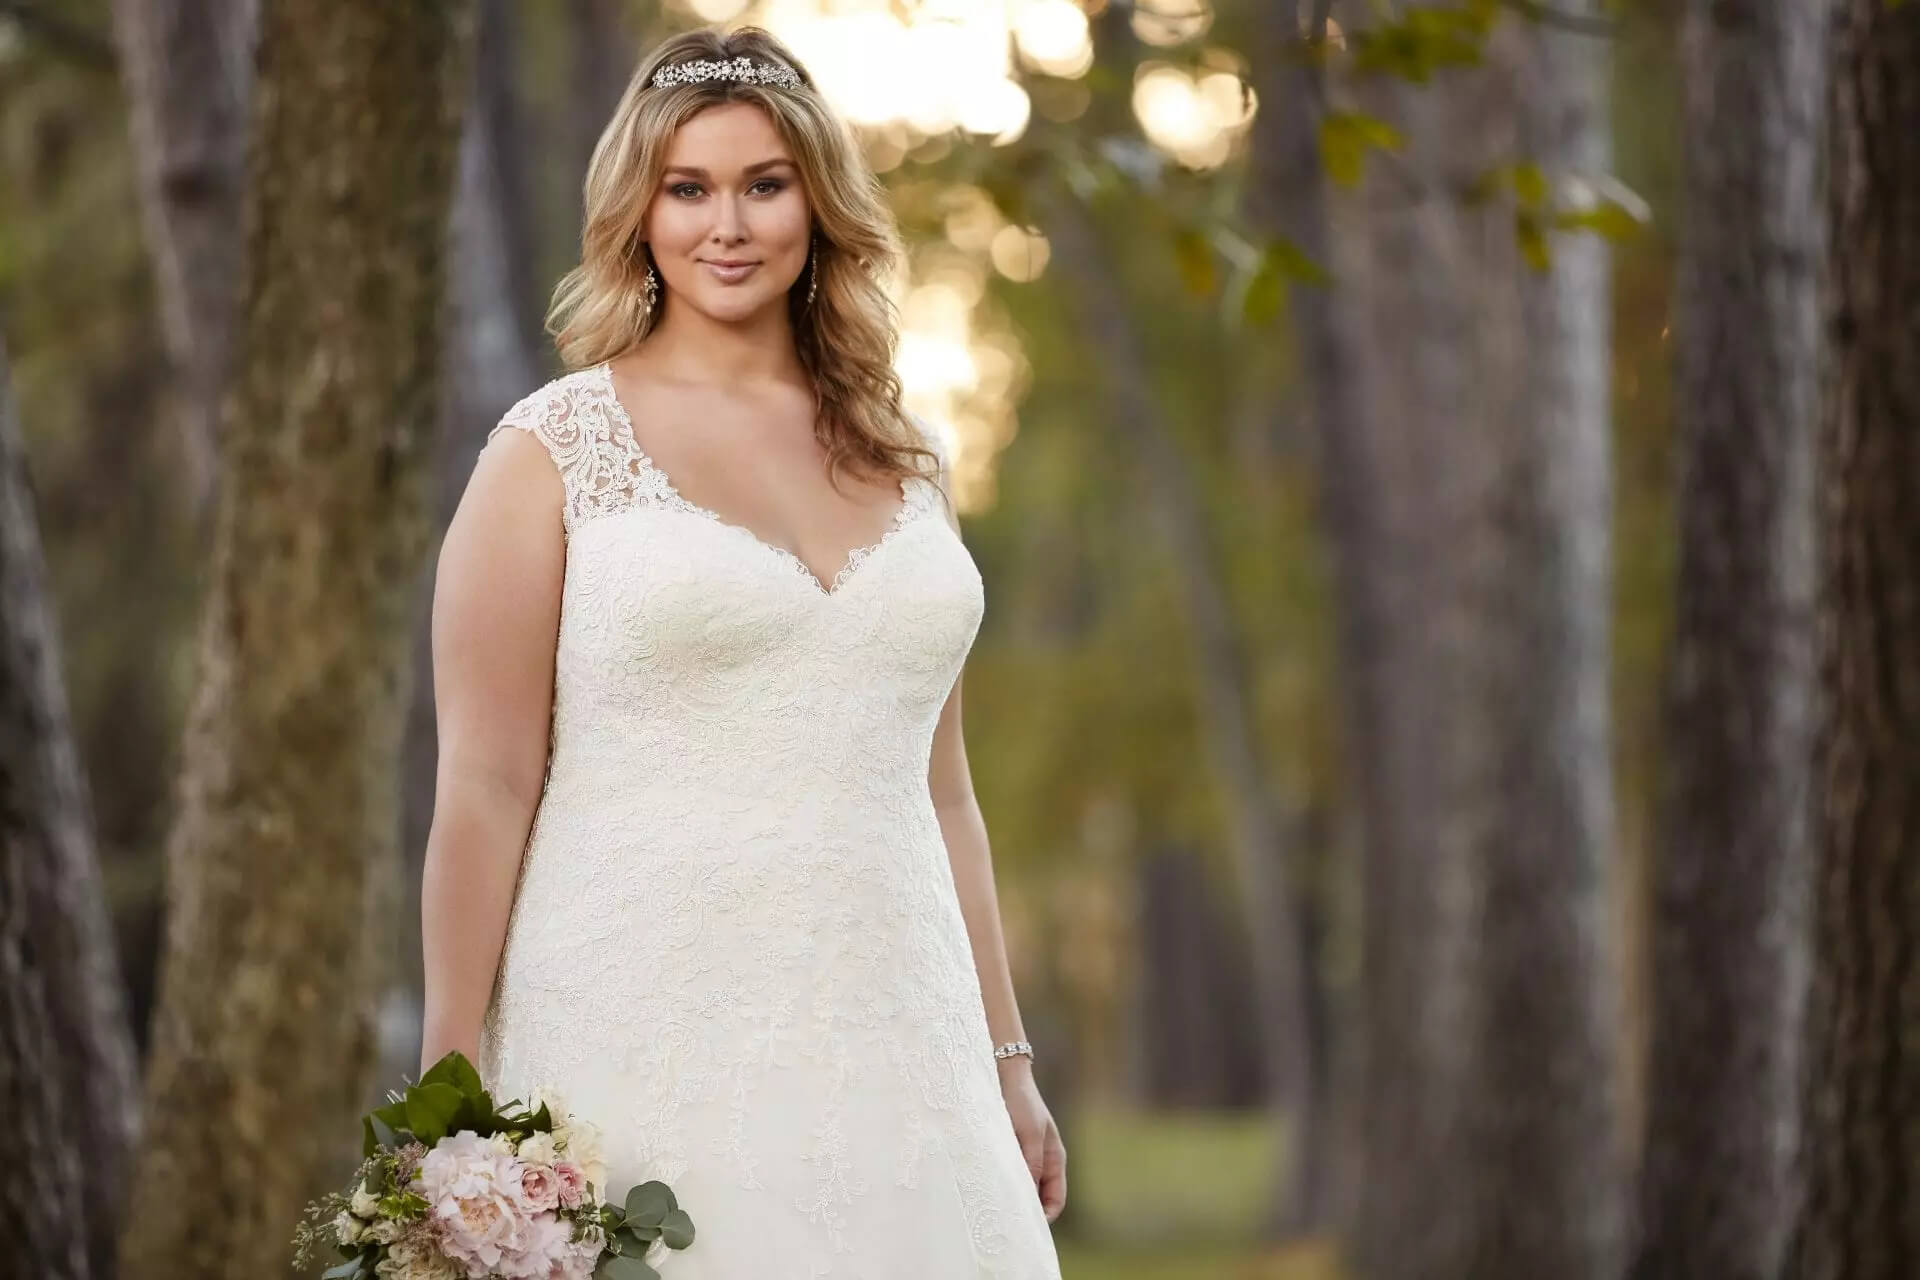 Plus size wedding outfit for bride